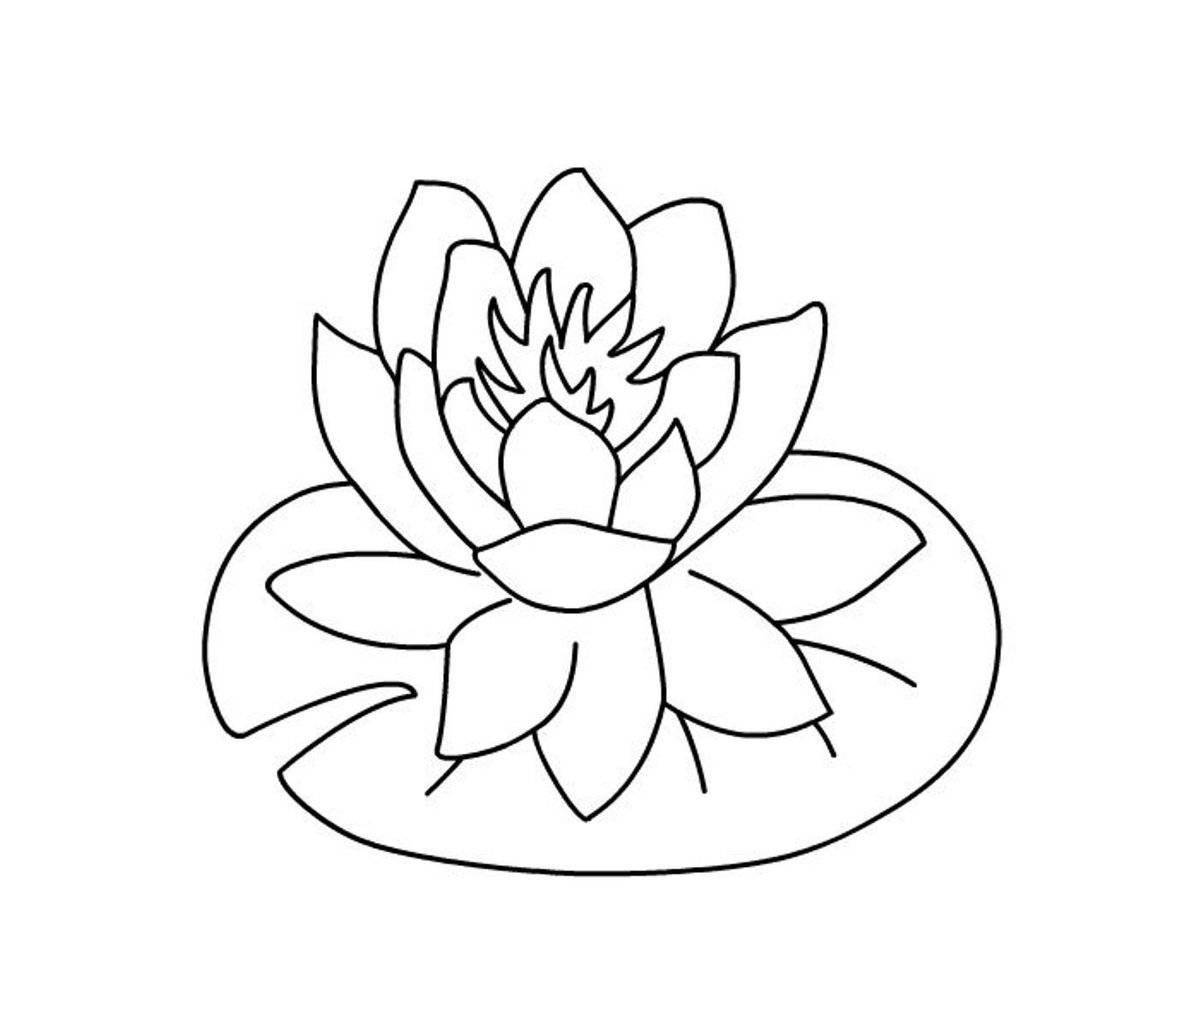 Gorgeous lotus coloring book for kids